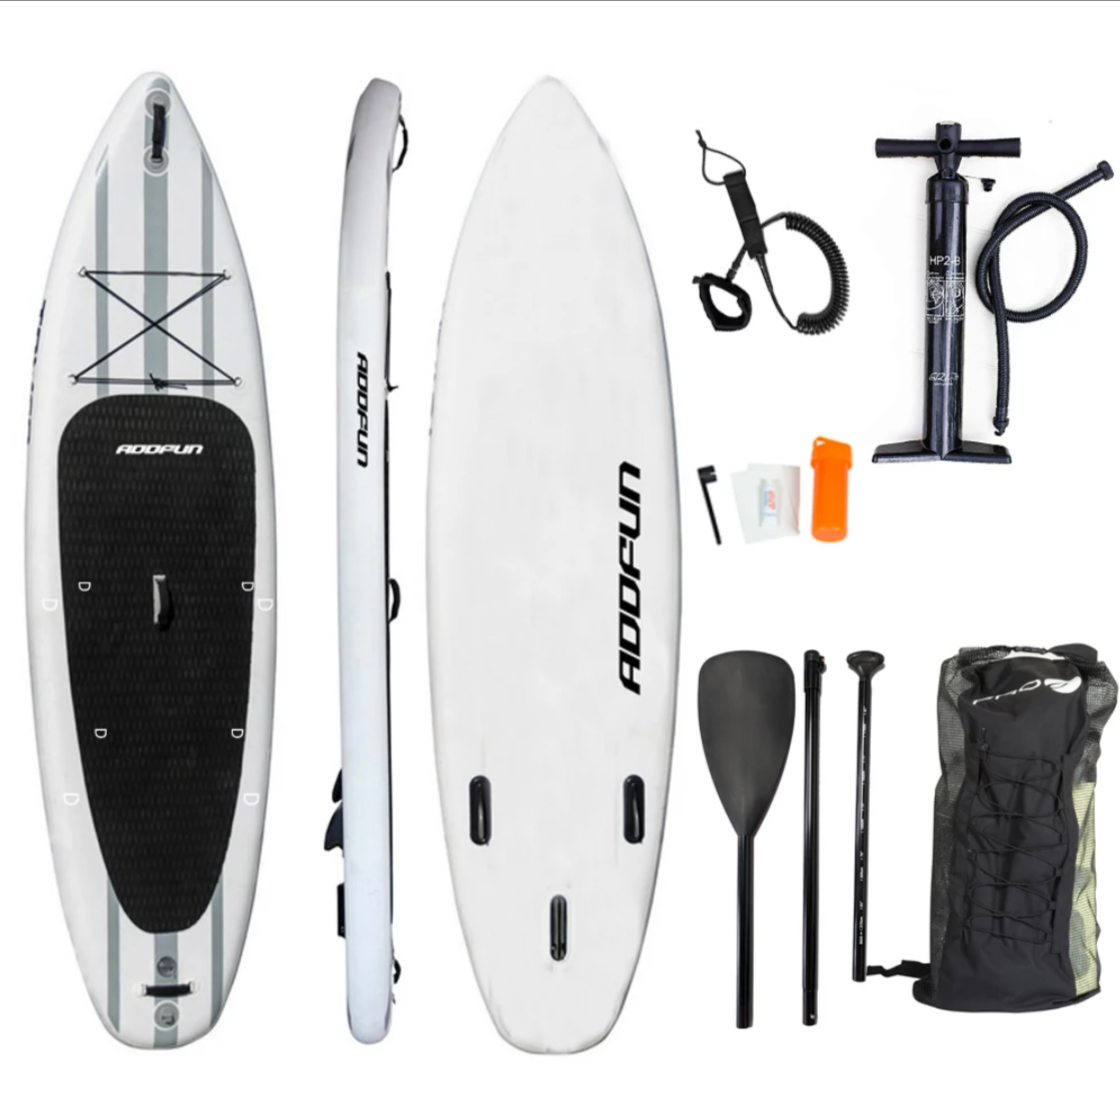 ADDFUN Premium 10'6" Inflatable Stand Up Paddle Board w/Accessories 6" thick